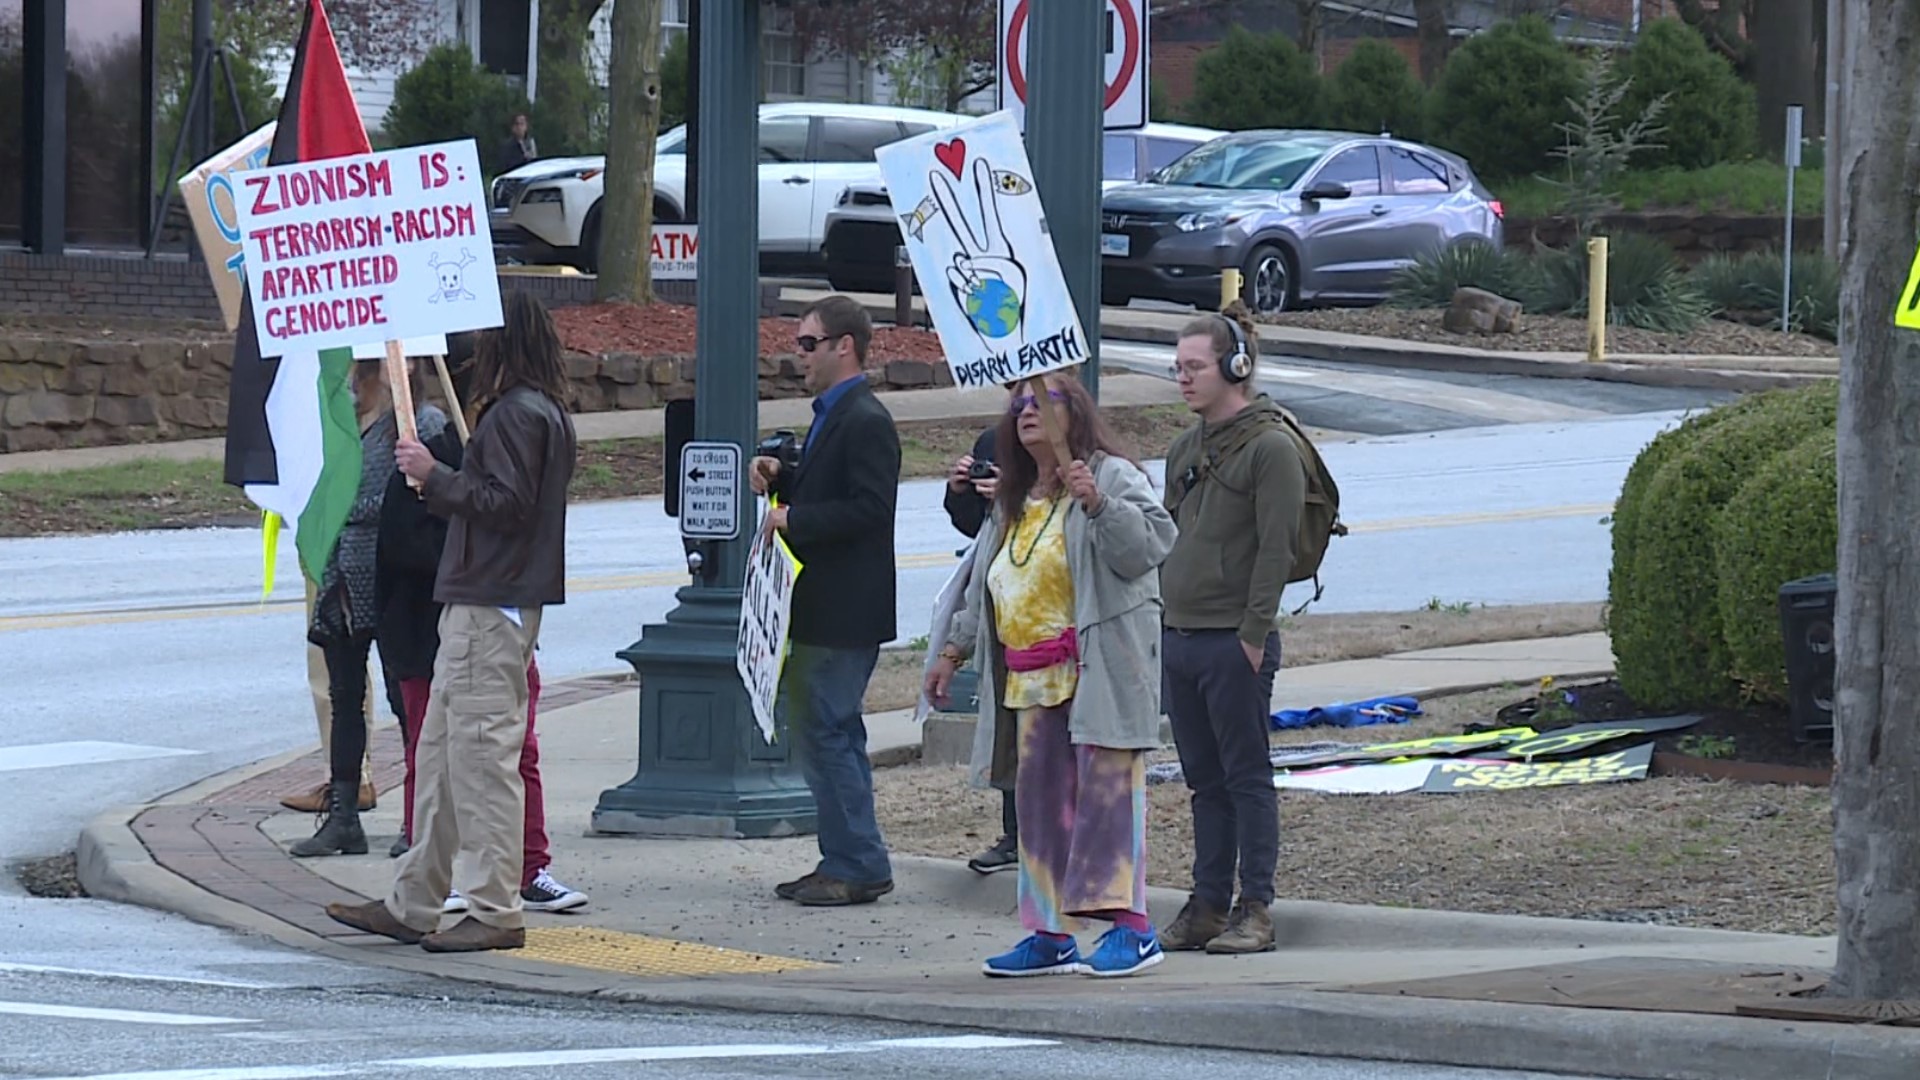 A "No More War" peaceful protest was held in Fayetteville this weekend.